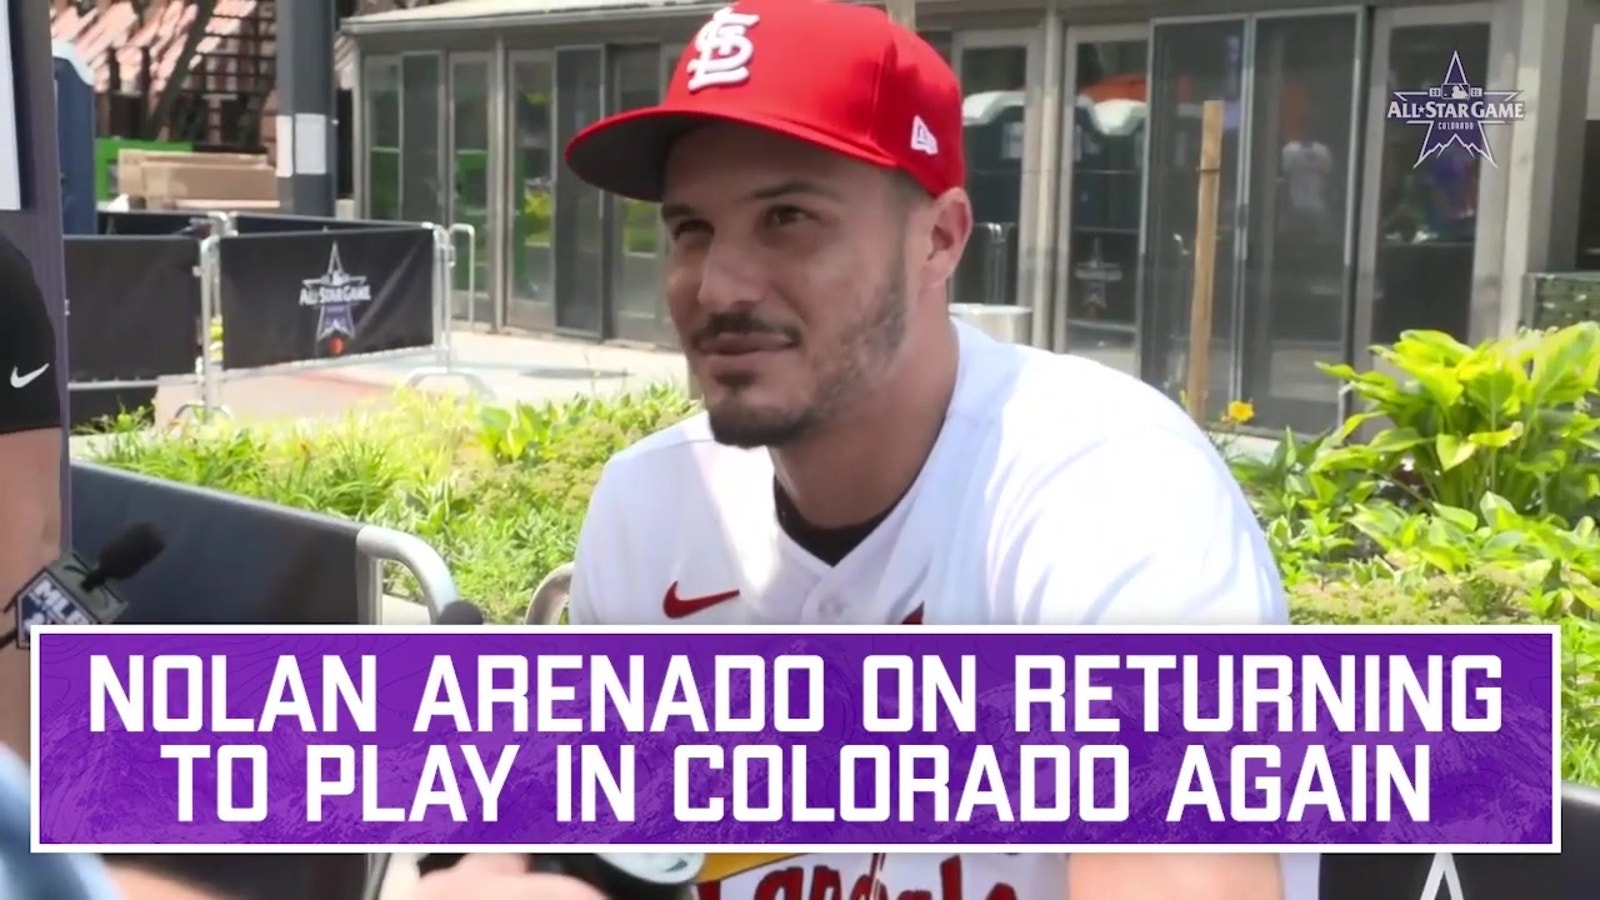 'I love everything about this place' -- Nolan Arenado on returning to Colorado